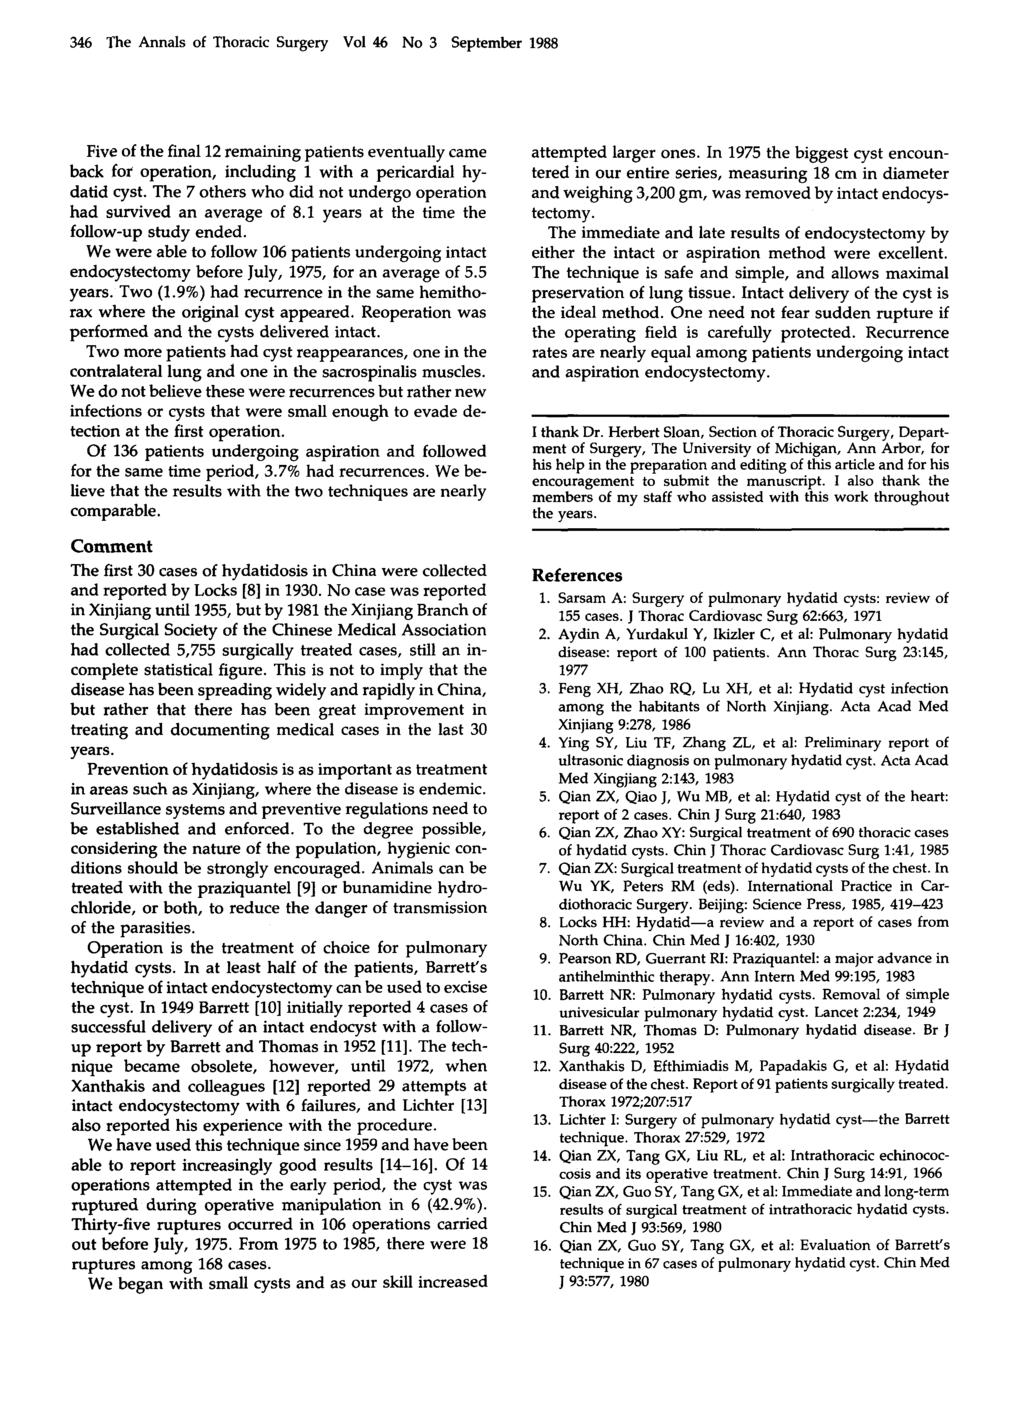 346 The Annals of Thoracic Surgery Vol 46 No 3 September 1988 Five of the final 12 remaining patients eventually came back for operation, including 1 with a pericardial hydatid cyst.